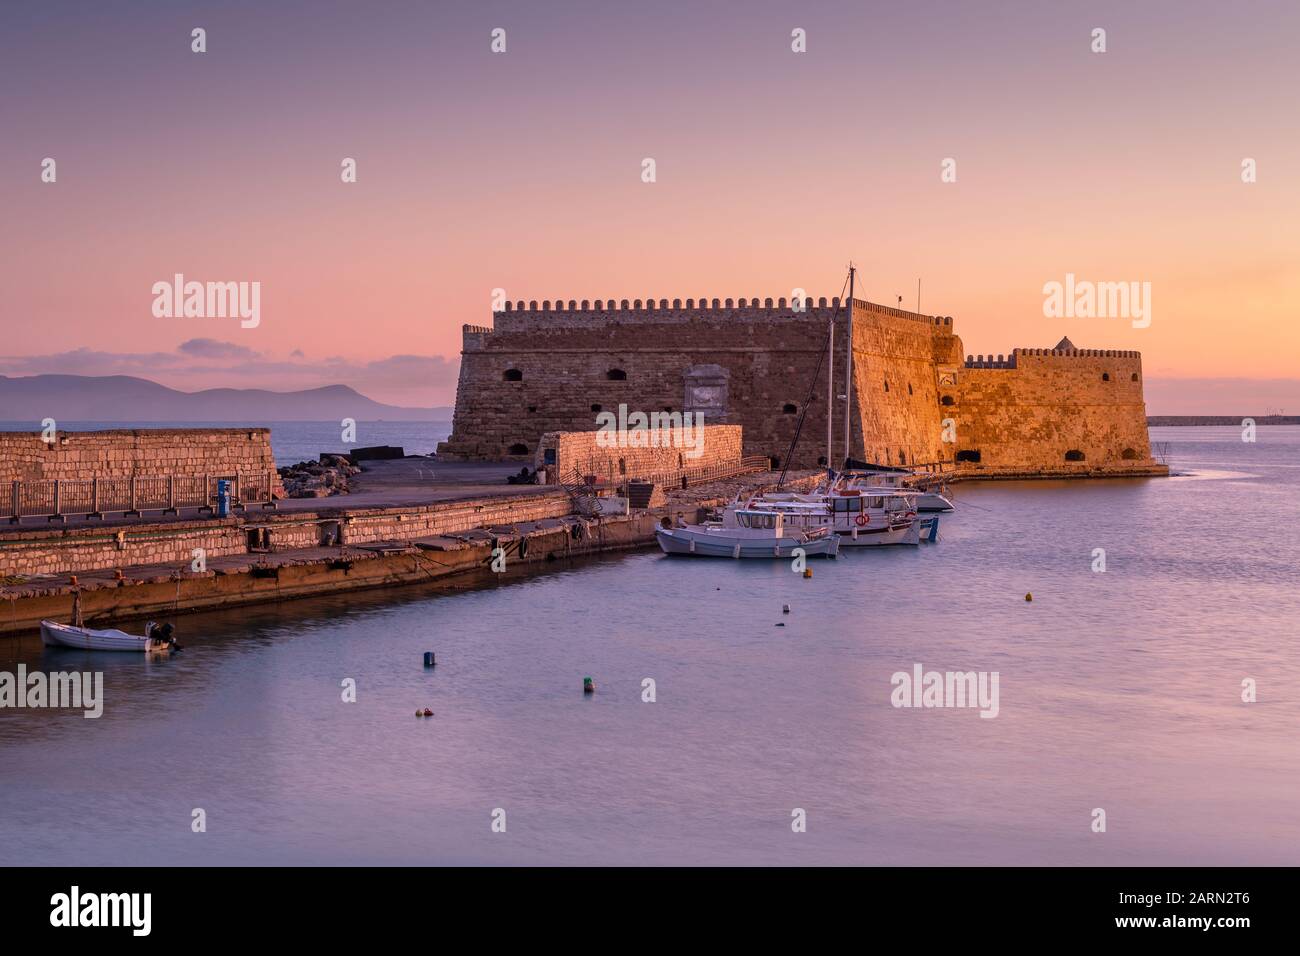 Venetian fortress in the old harbour of Heraklion in Crete, Greece. Stock Photo